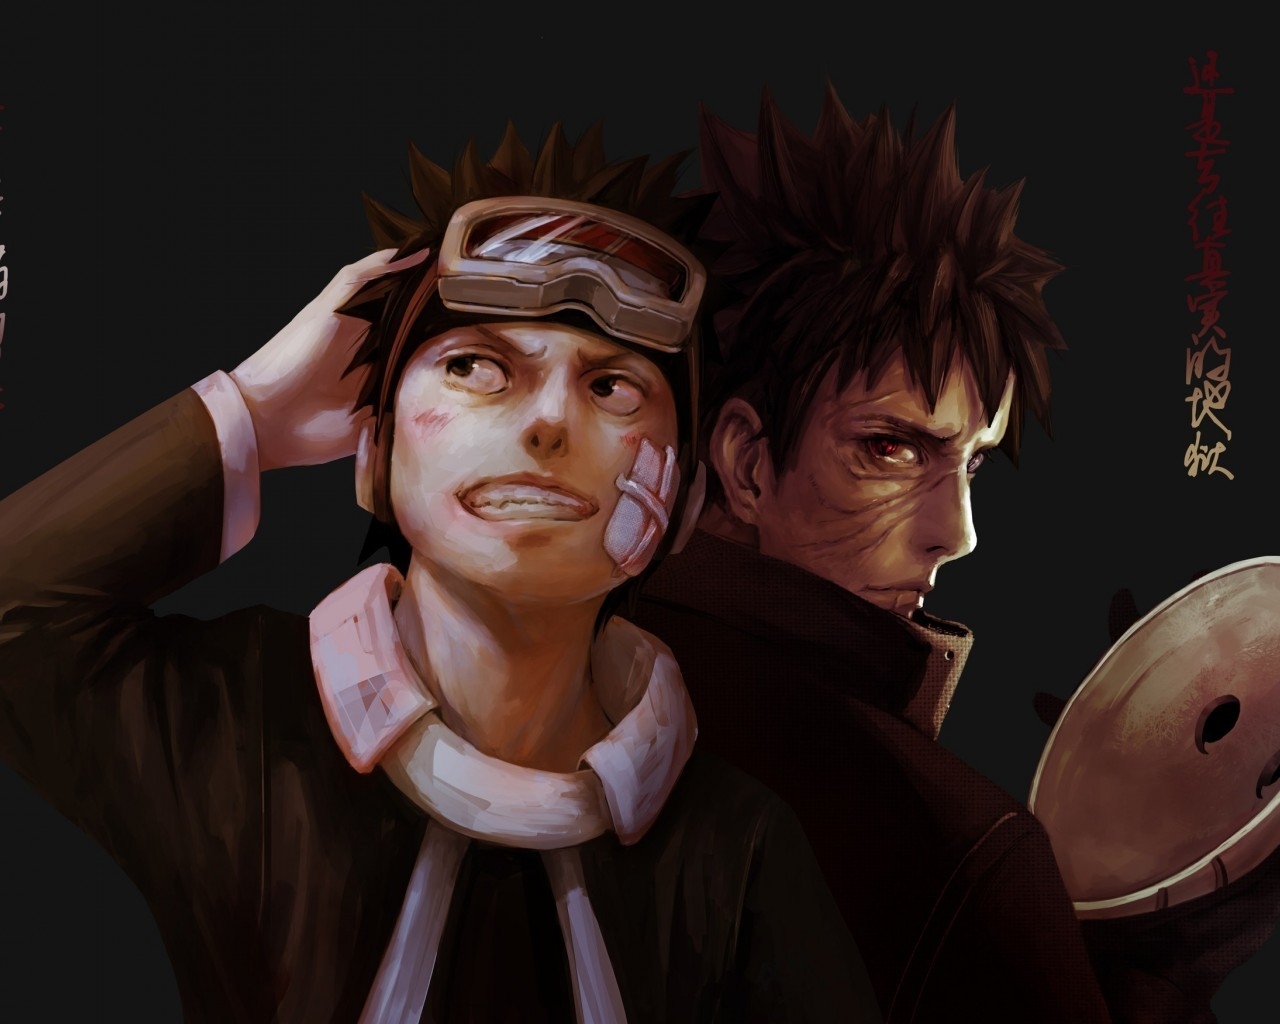 Naruto Style for 1280 x 1024 resolution